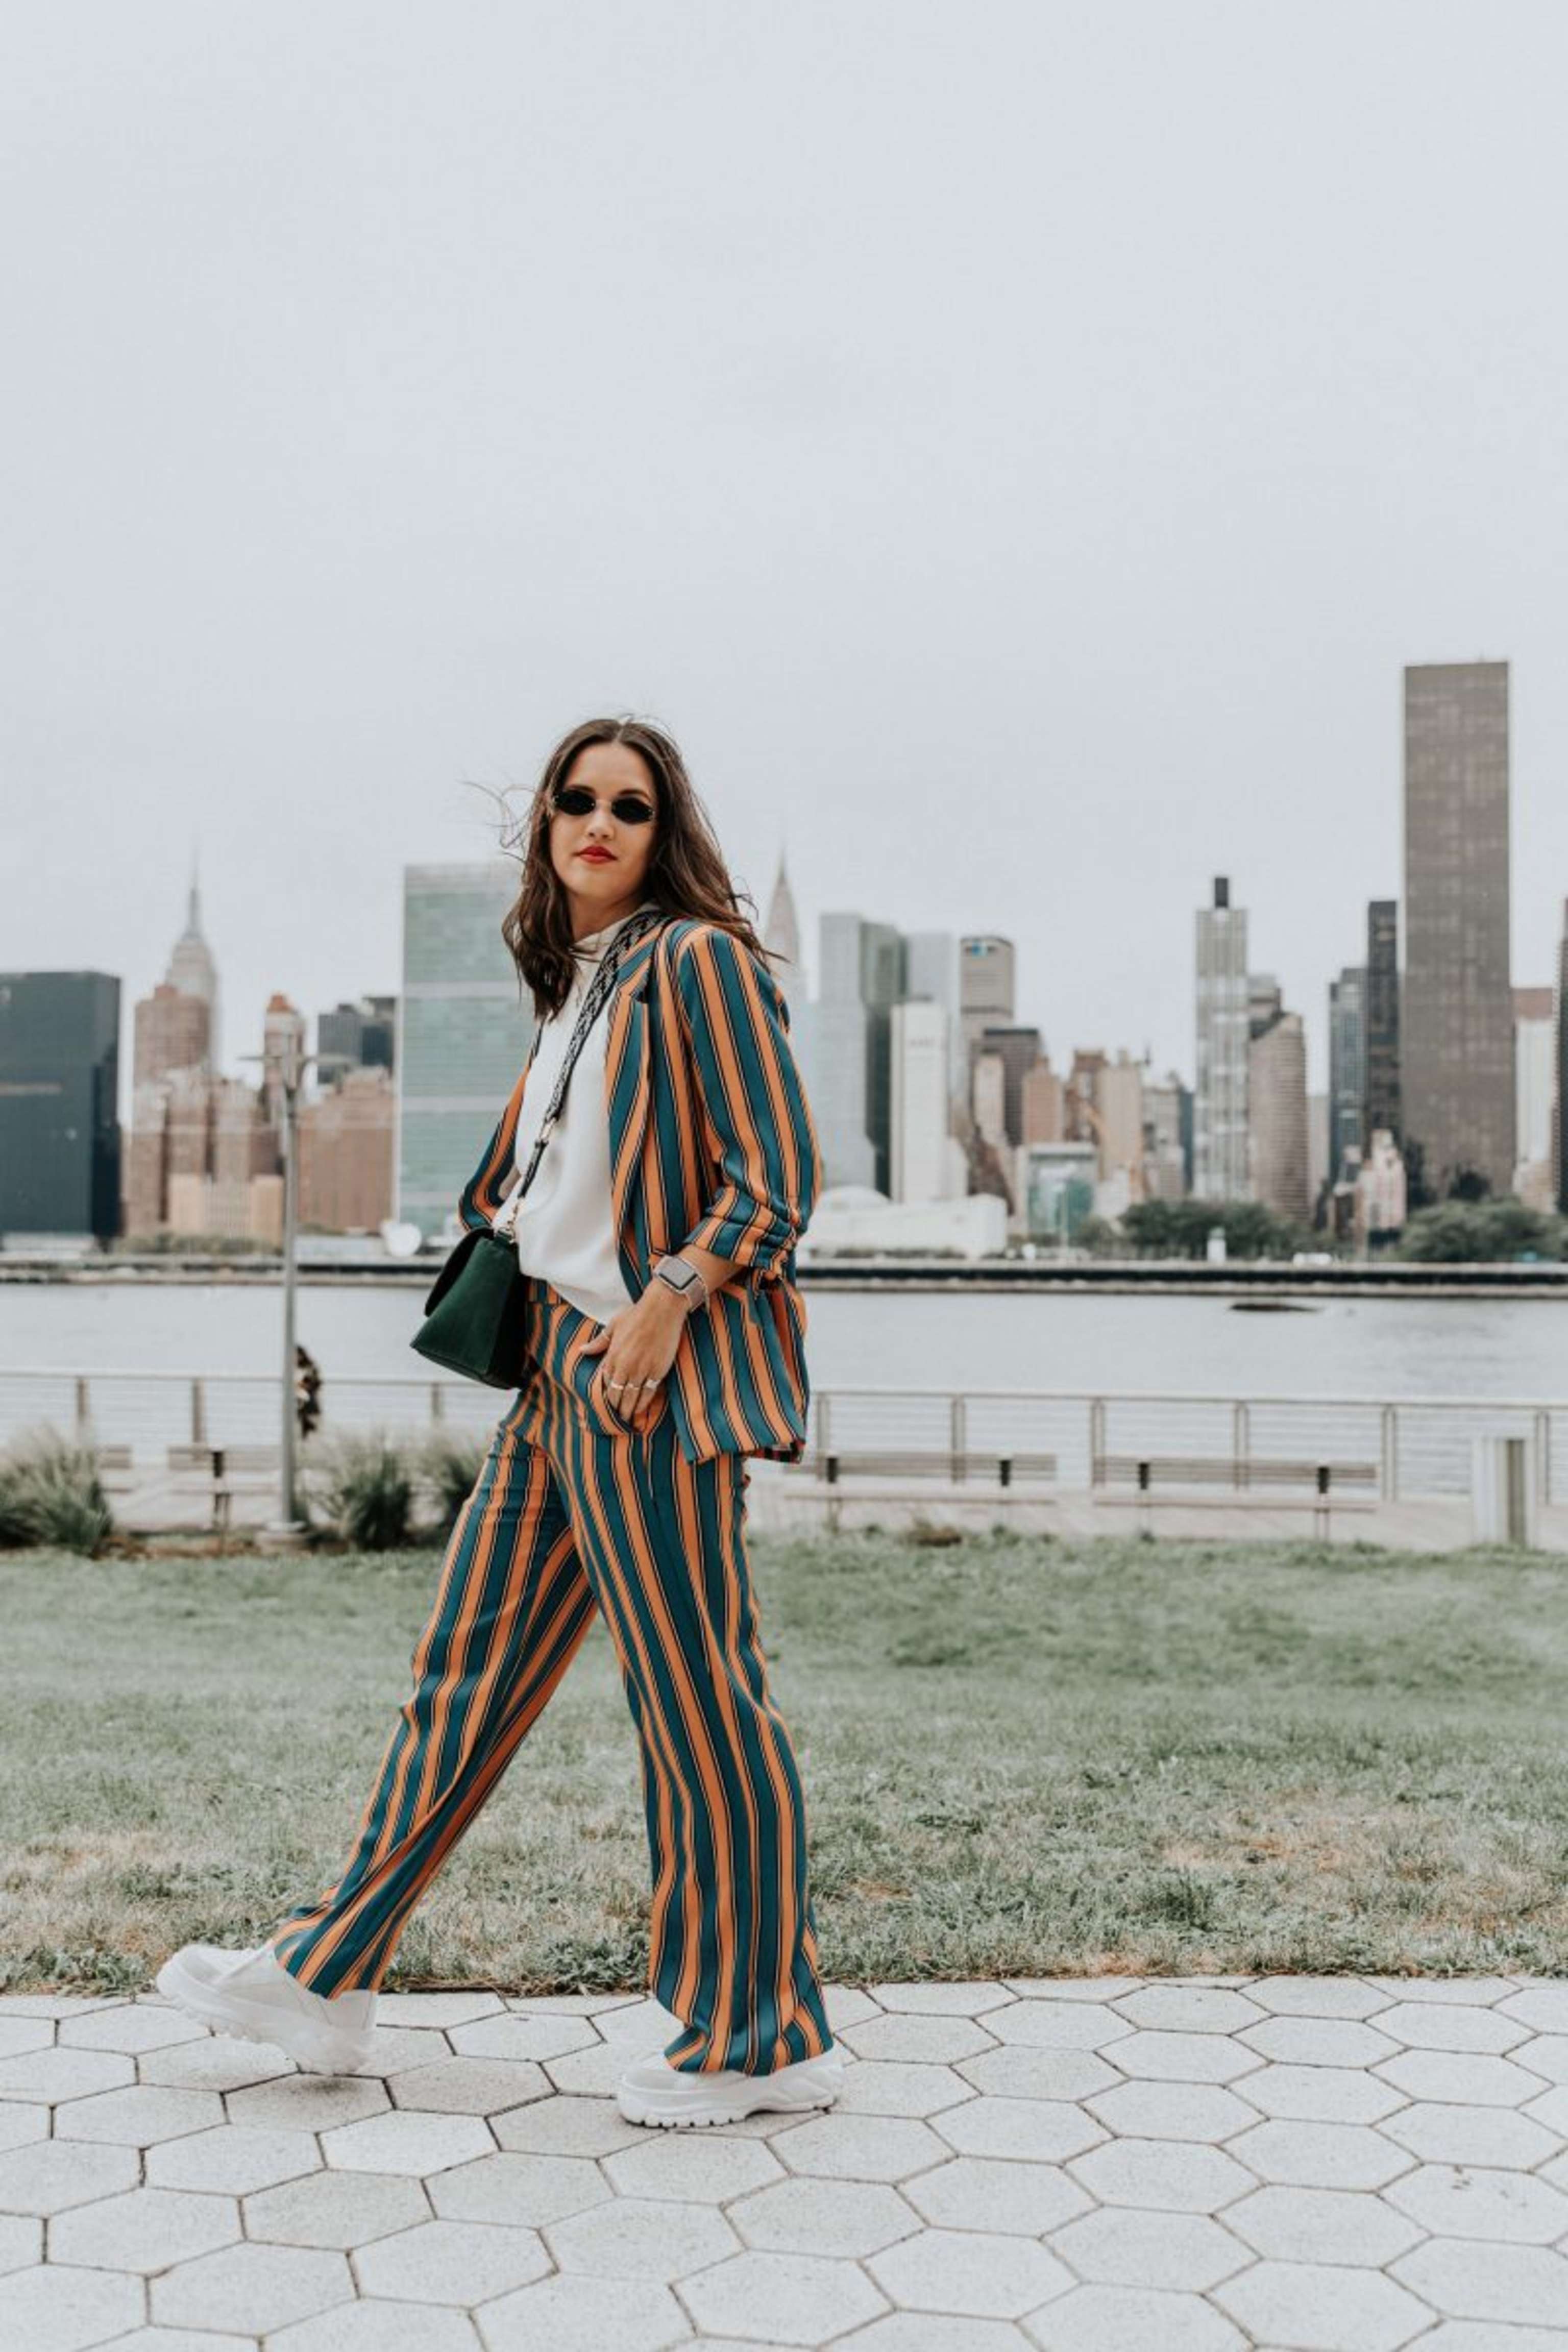 #FlorenNYFW – September 2018 – Look #4: The striped suit.